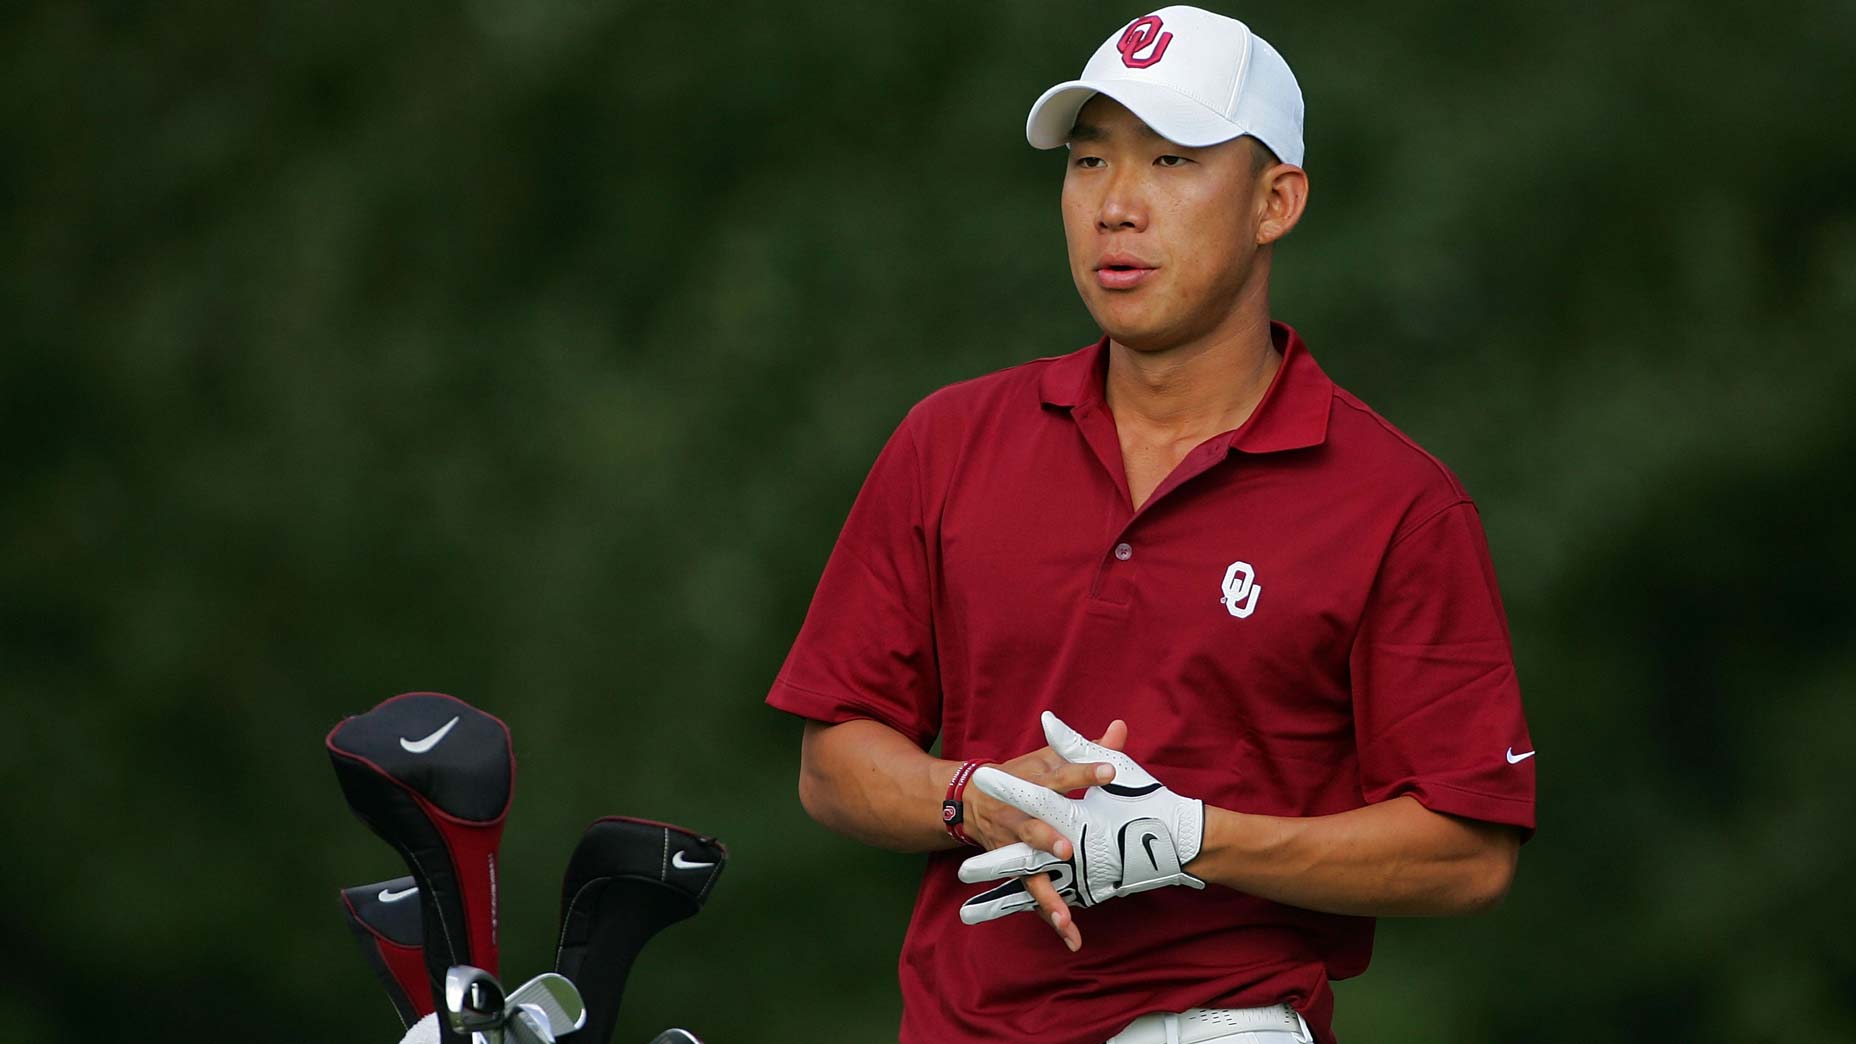 Anthony Kim wears a University of Oklahoma jersey at the 2009 Deutsche Bank Championship